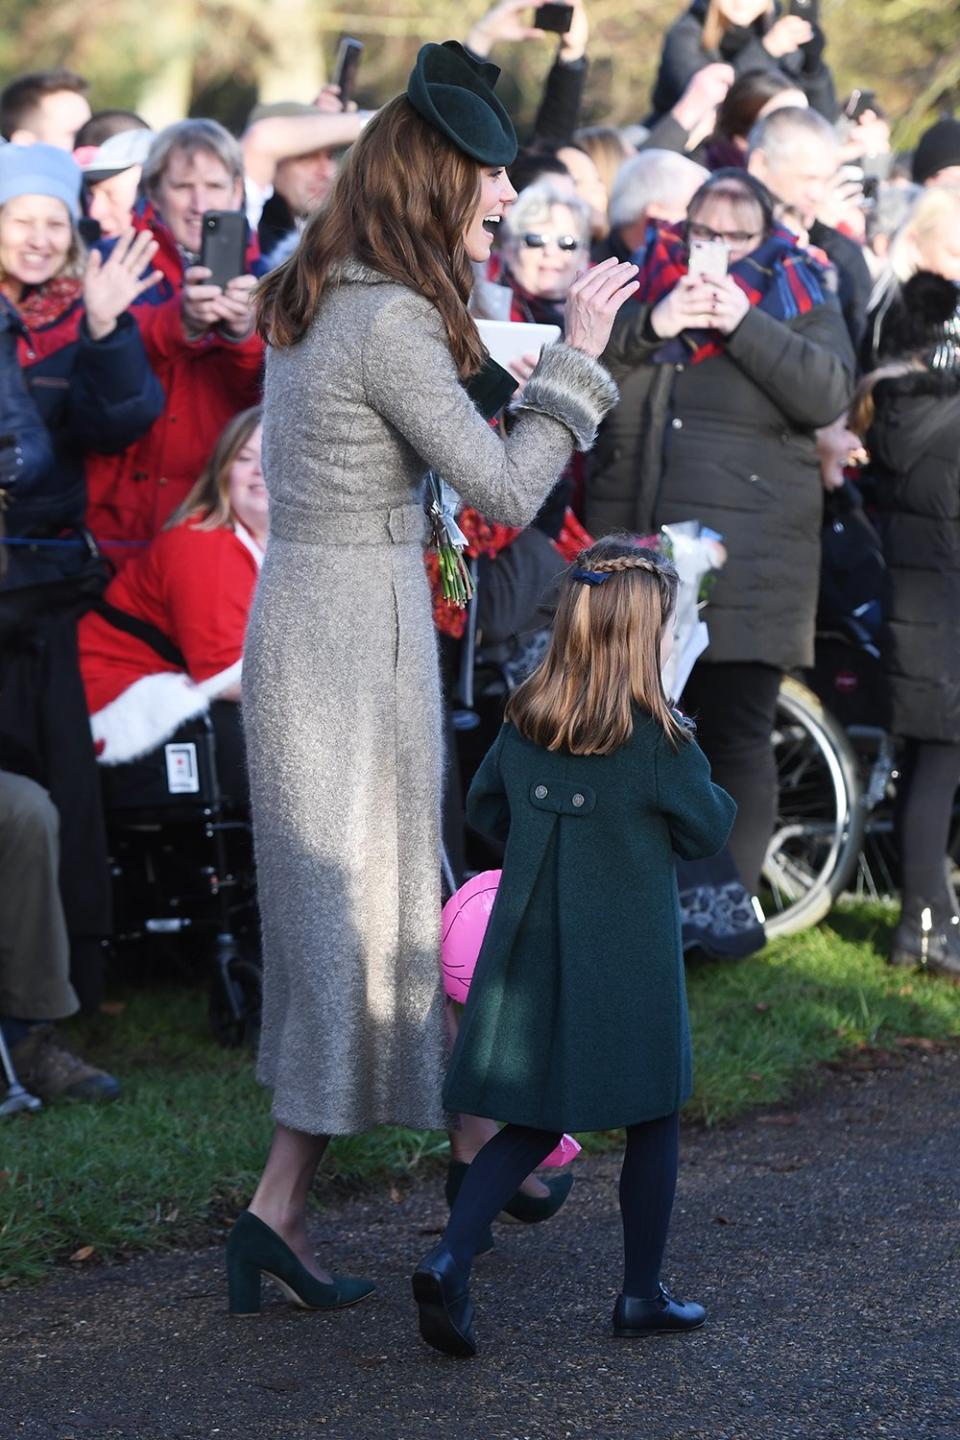 George and Charlotte delighted well-wishers who lined the route surrounding the 16th-century church to catch a glimpse of the royal family. Following the church service, the royals greeted eager fans to wish them a merry Christmas.